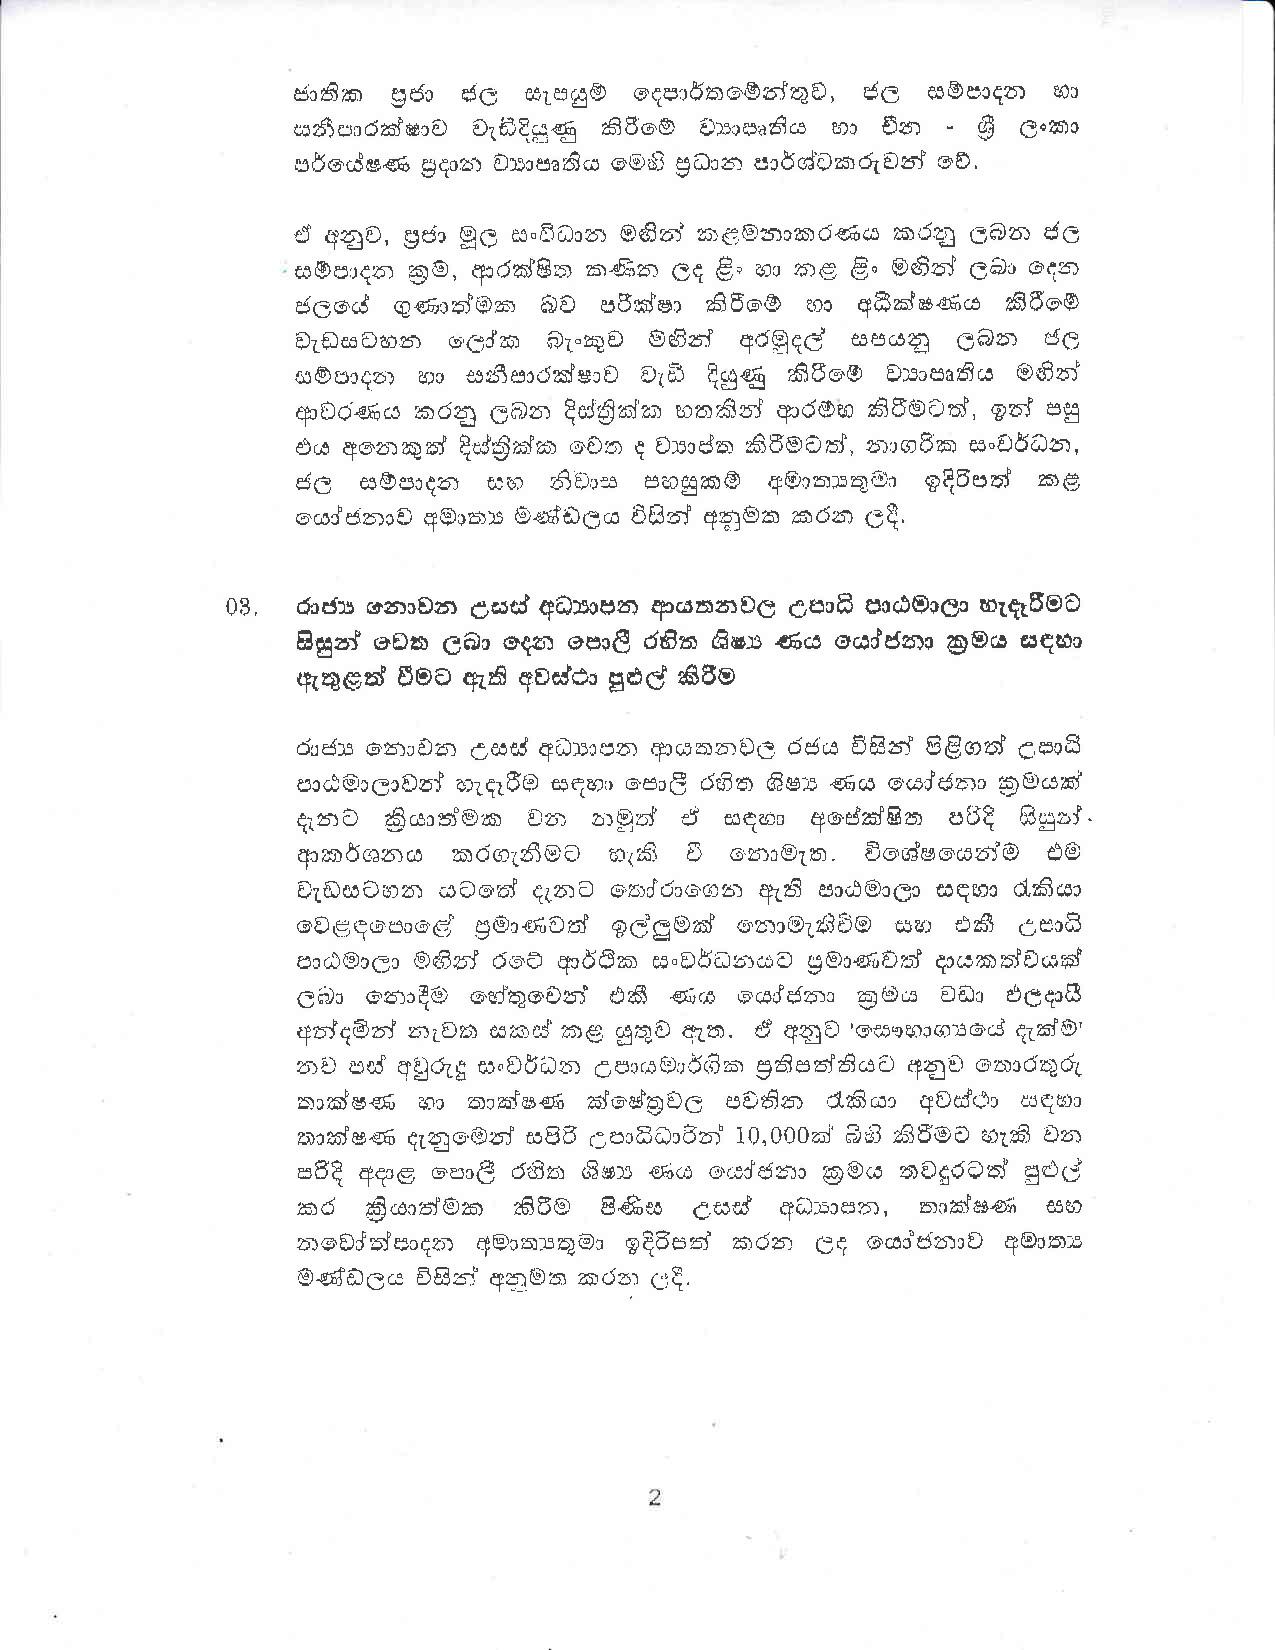 Cabinet Decision on 02.01.2020 page 002